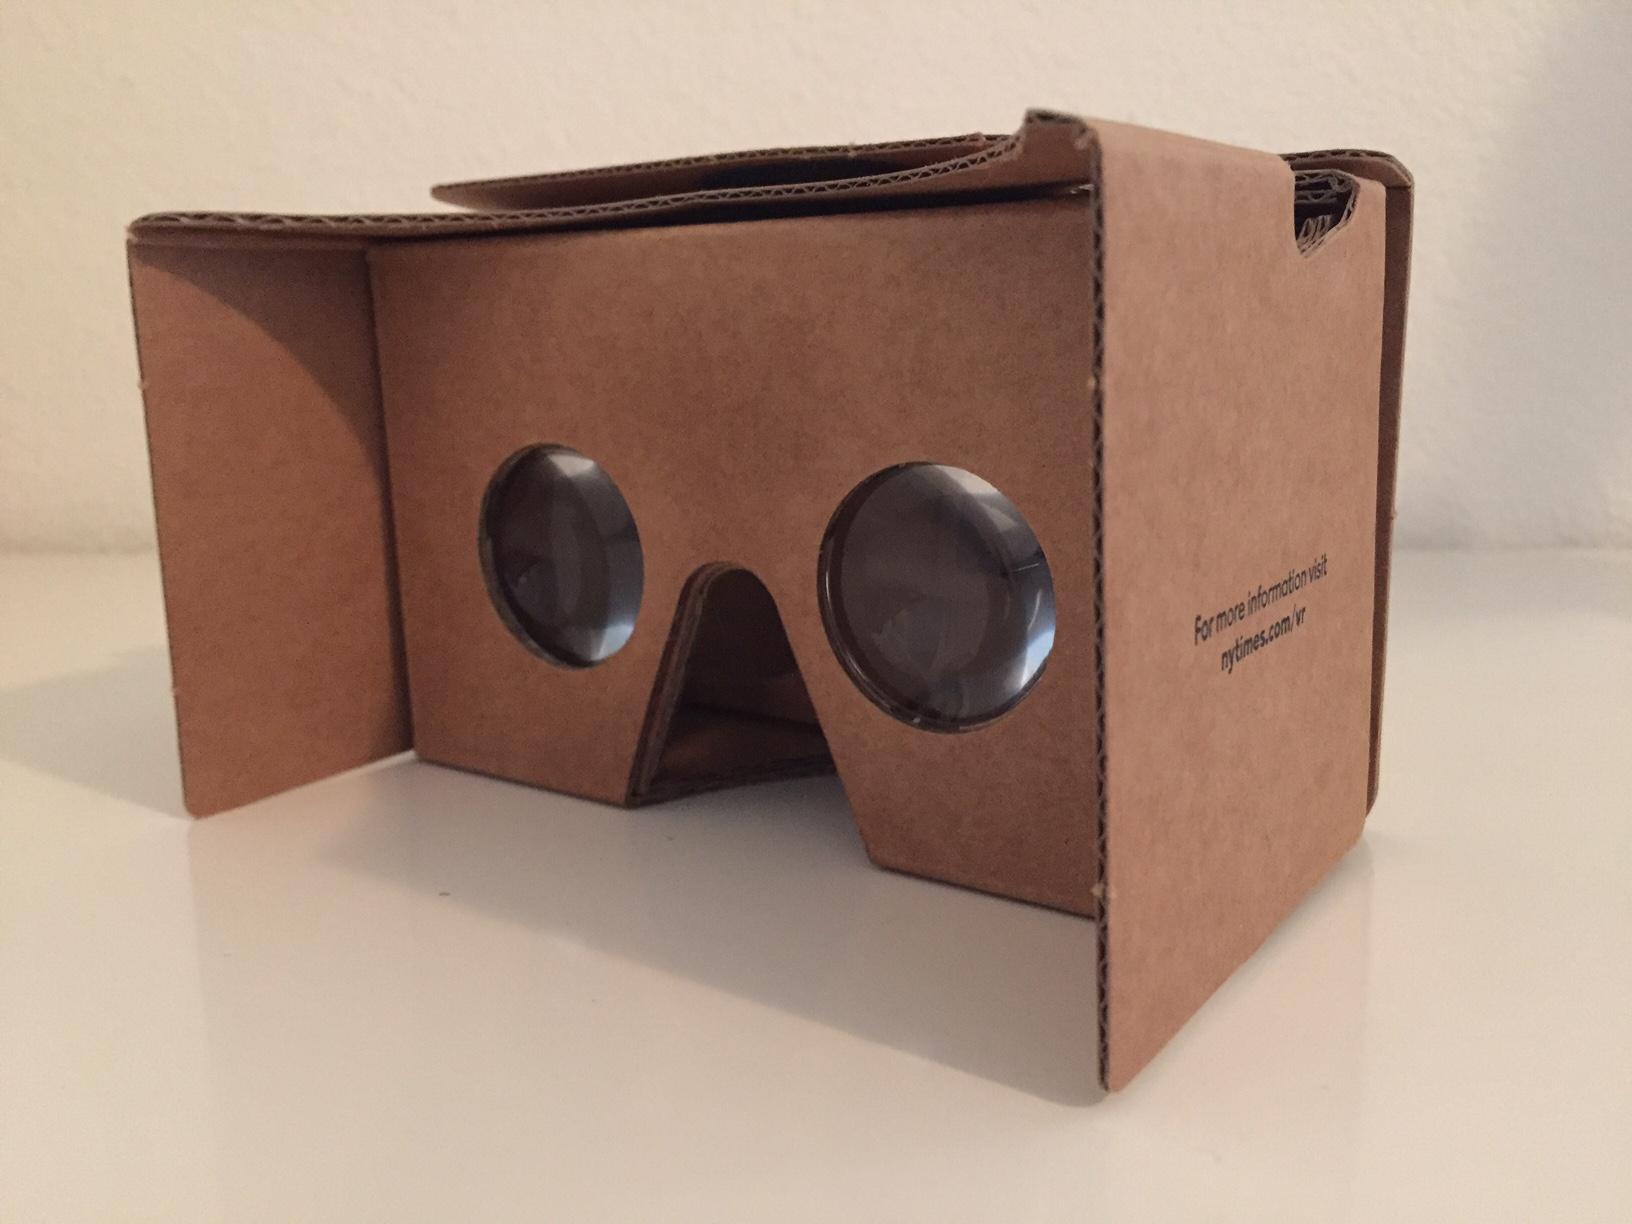 In partnership with Google, the New York Times distributed Google Cardboard eyepieces to its mail subscribers. The Google Cardboard produces a stereoscopic effect and makes objects appear 3D. Photo by Dhara Yu.